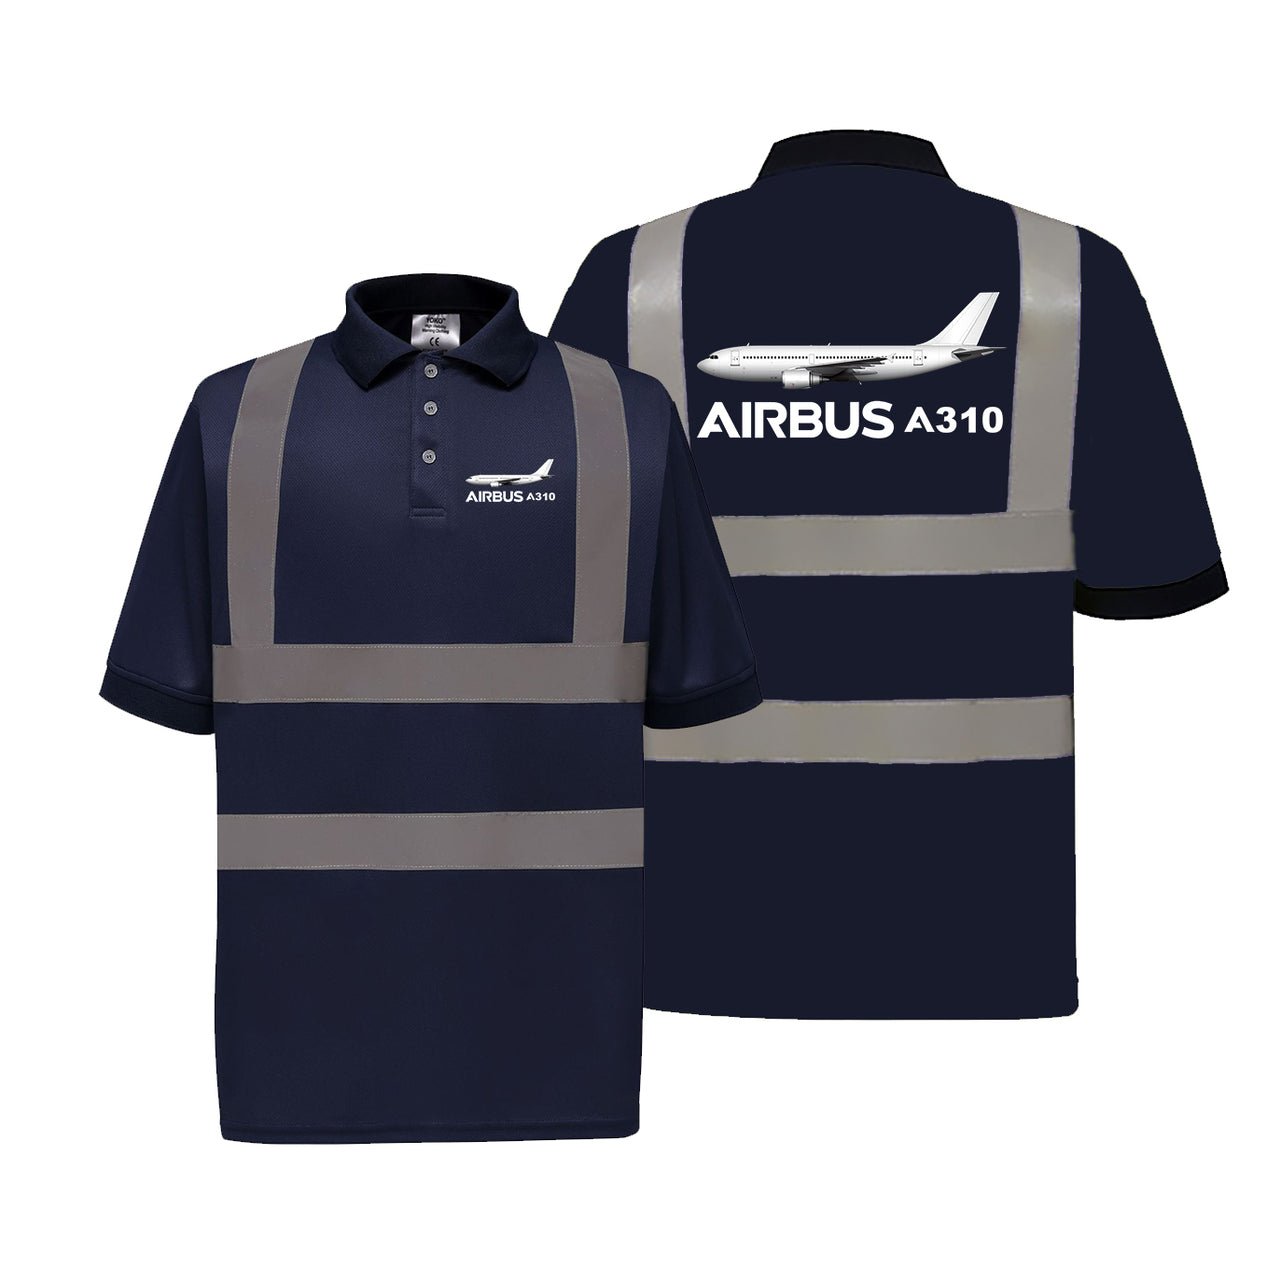 The Airbus A310 Designed Reflective Polo T-Shirts